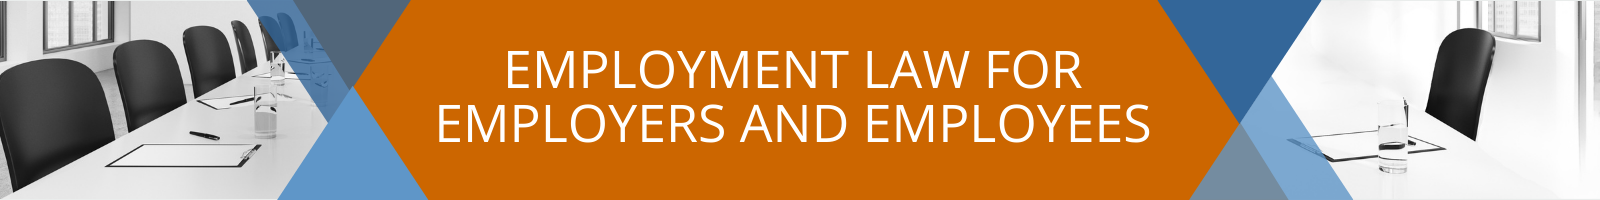 Employment Law for Employers and Employees